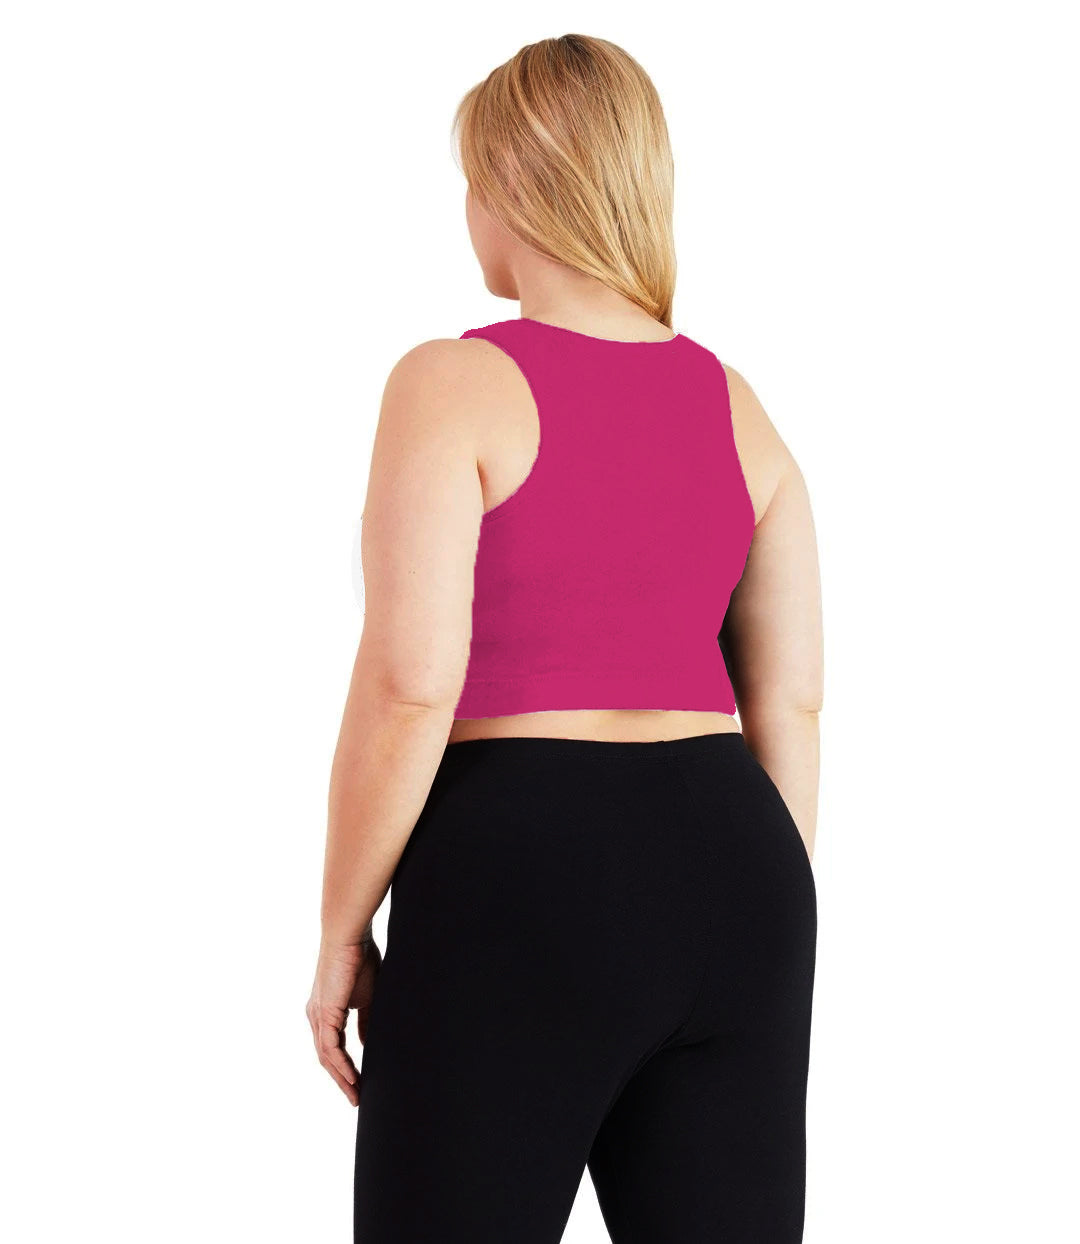 Plus size woman, facing back, wearing JunoActive plus size Stretch Naturals V-Neck Bra top in Geranium Pink. The woman is wearing black JunoActive plus size leggings. Her arms fall naturally to her side.